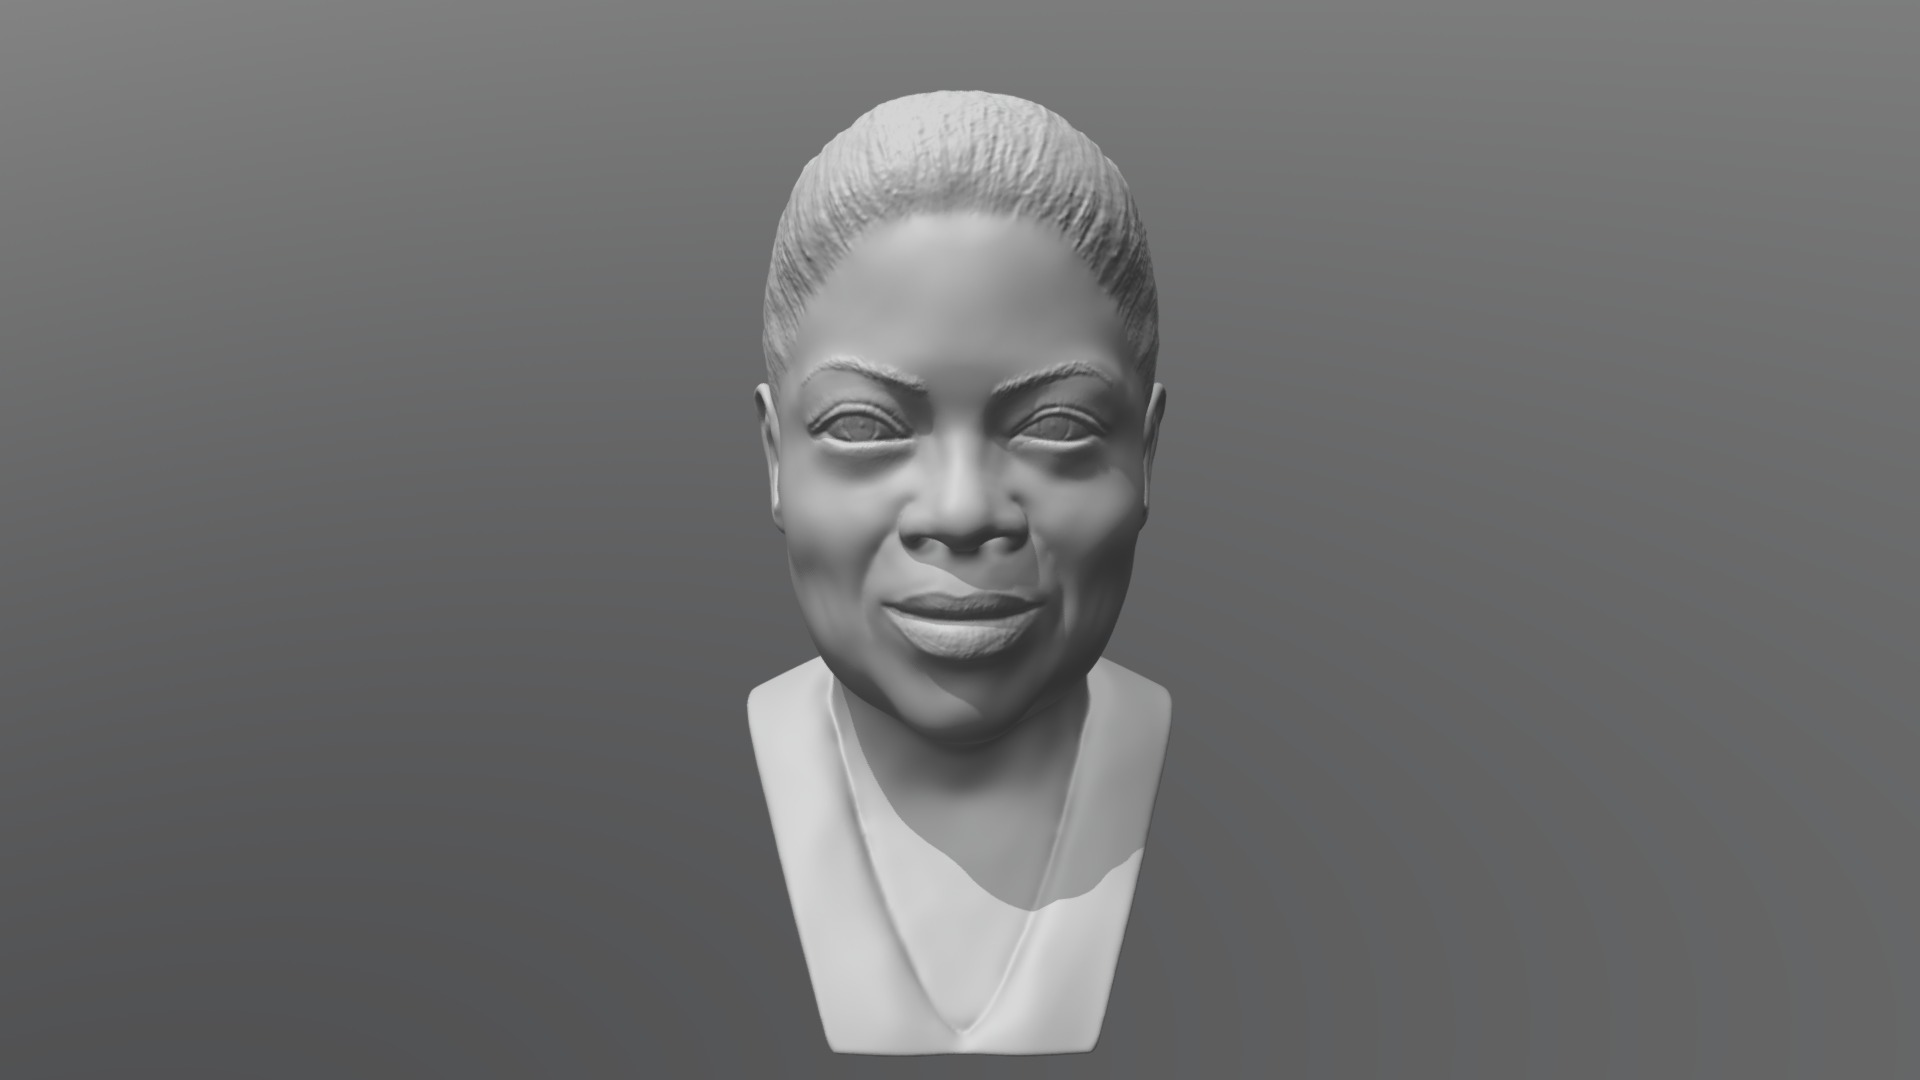 3D model Oprah Winfrey bust for 3D printing - This is a 3D model of the Oprah Winfrey bust for 3D printing. The 3D model is about a person with a white shirt.